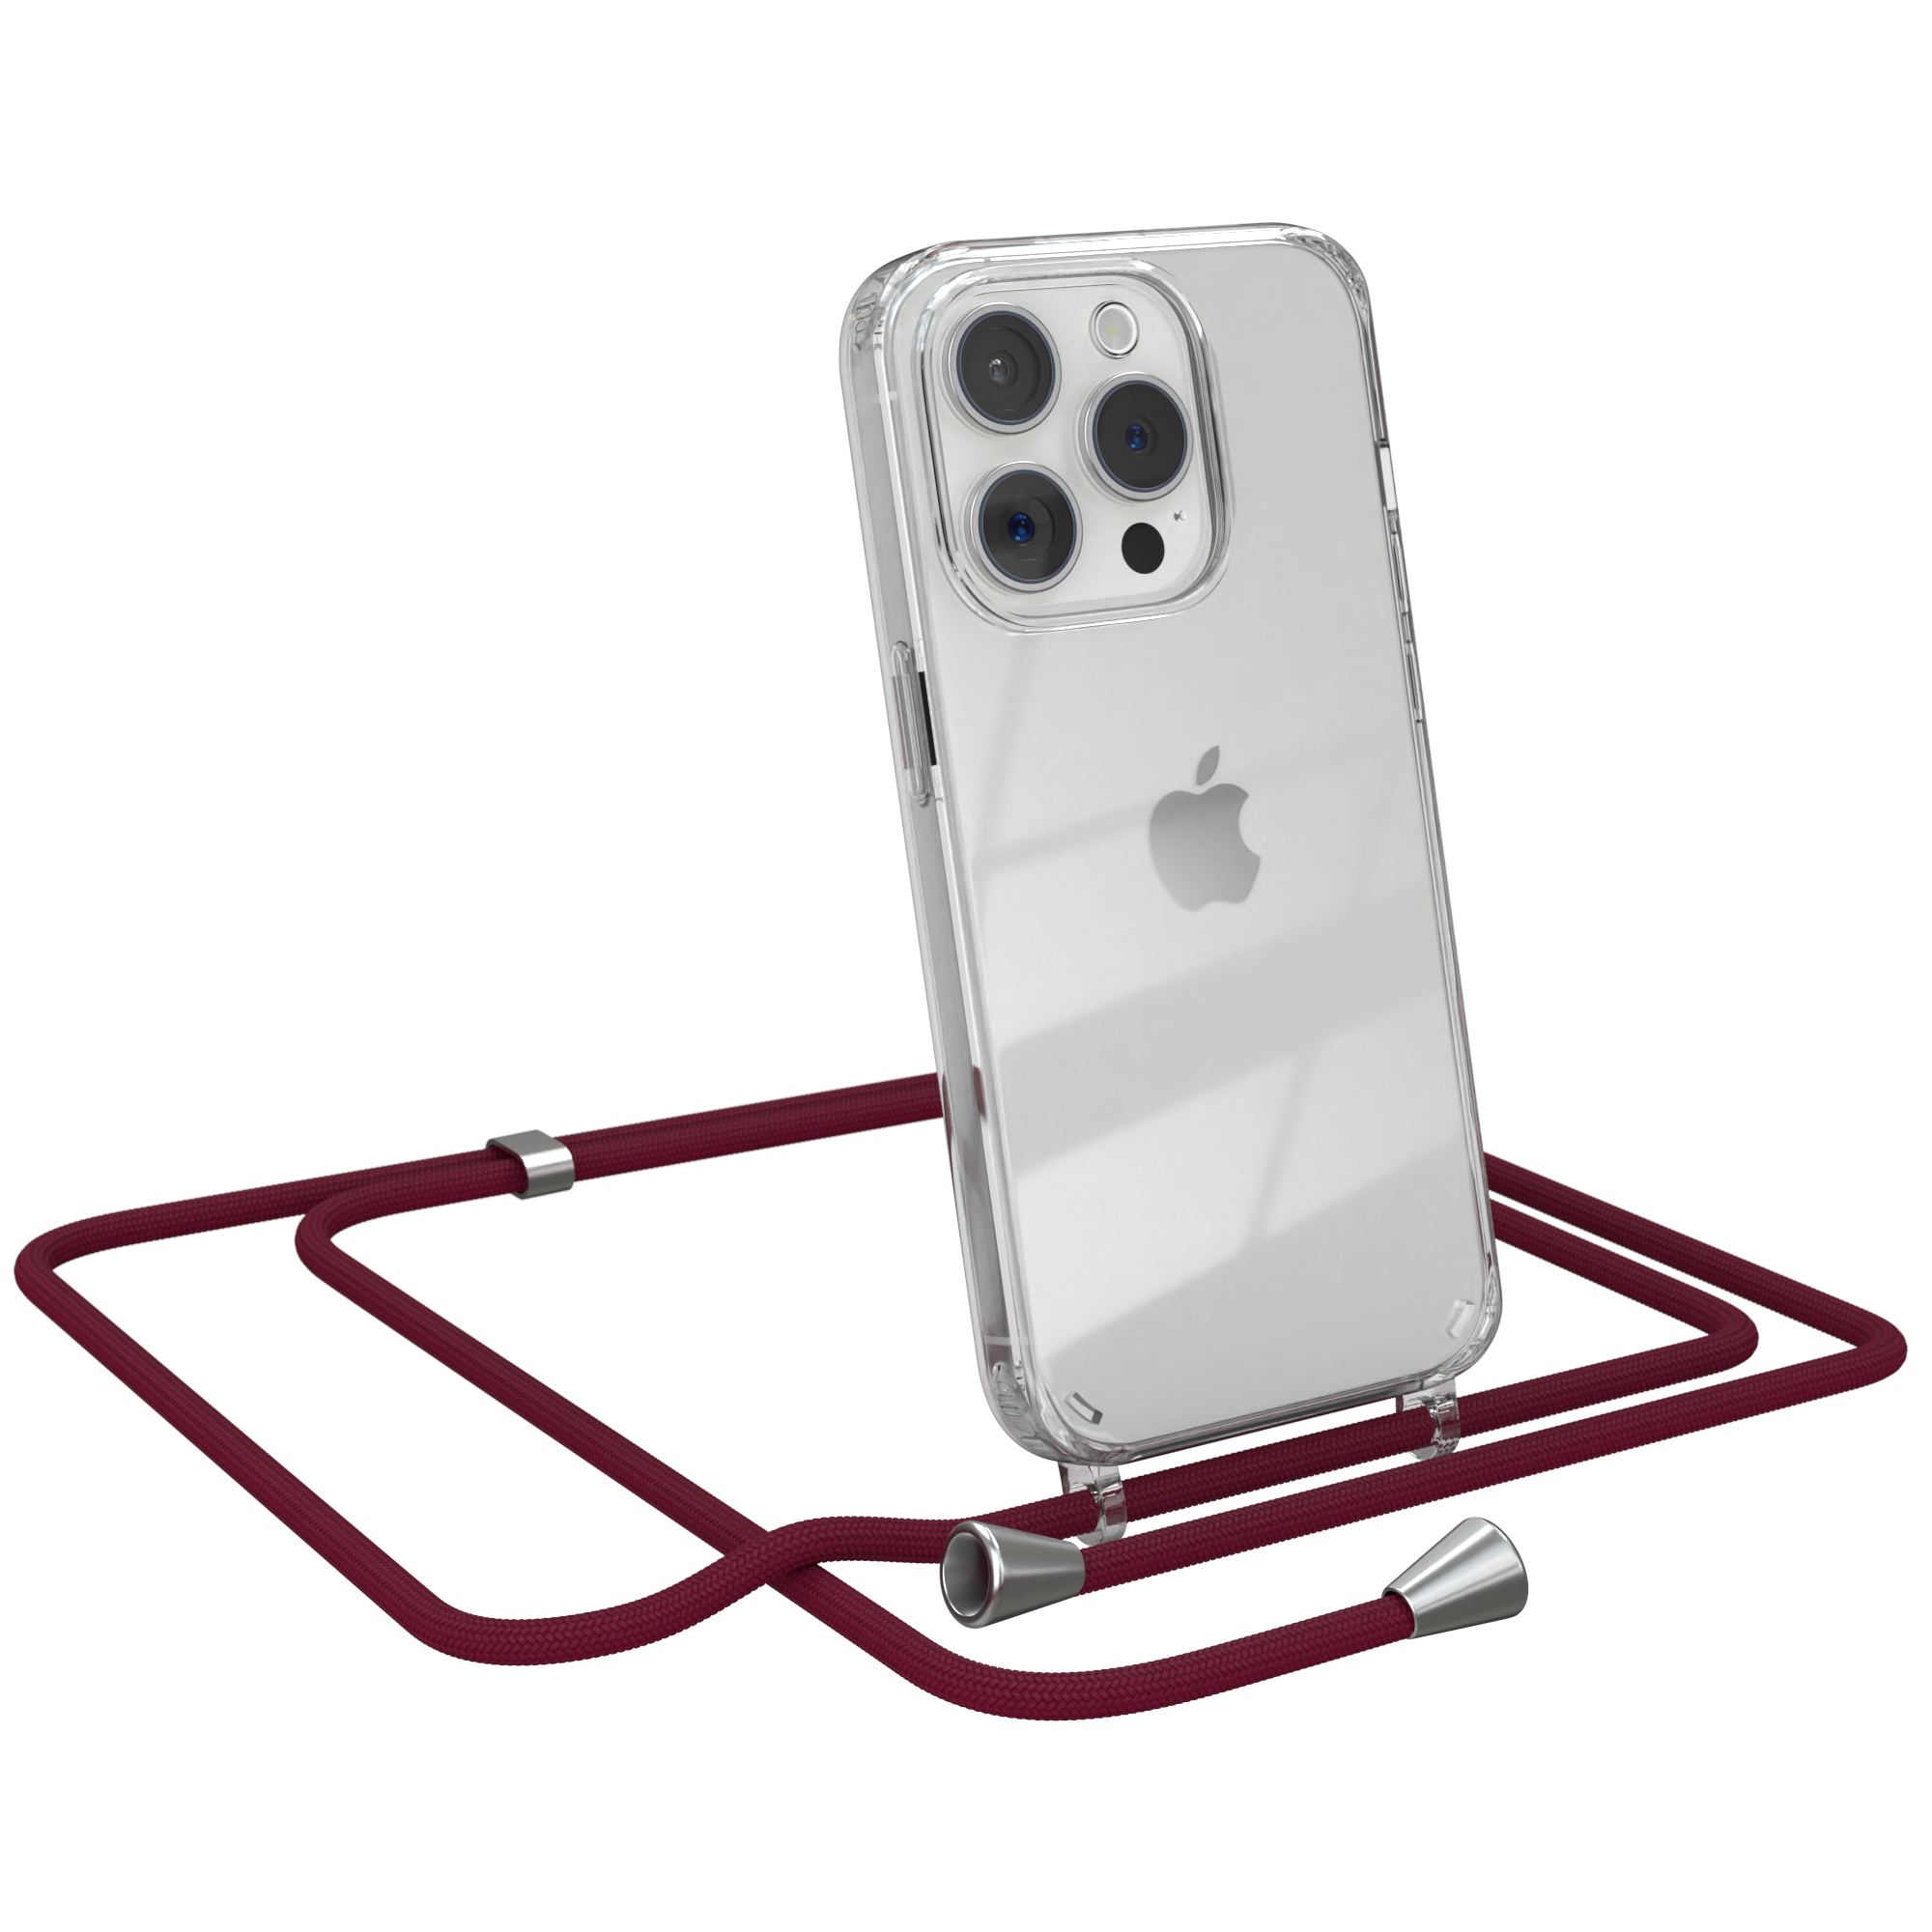 EAZY CASE Clear Cover Silber iPhone mit Apple, / Rot Umhängetasche, 15 Pro, Umhängeband, Clips Bordeaux